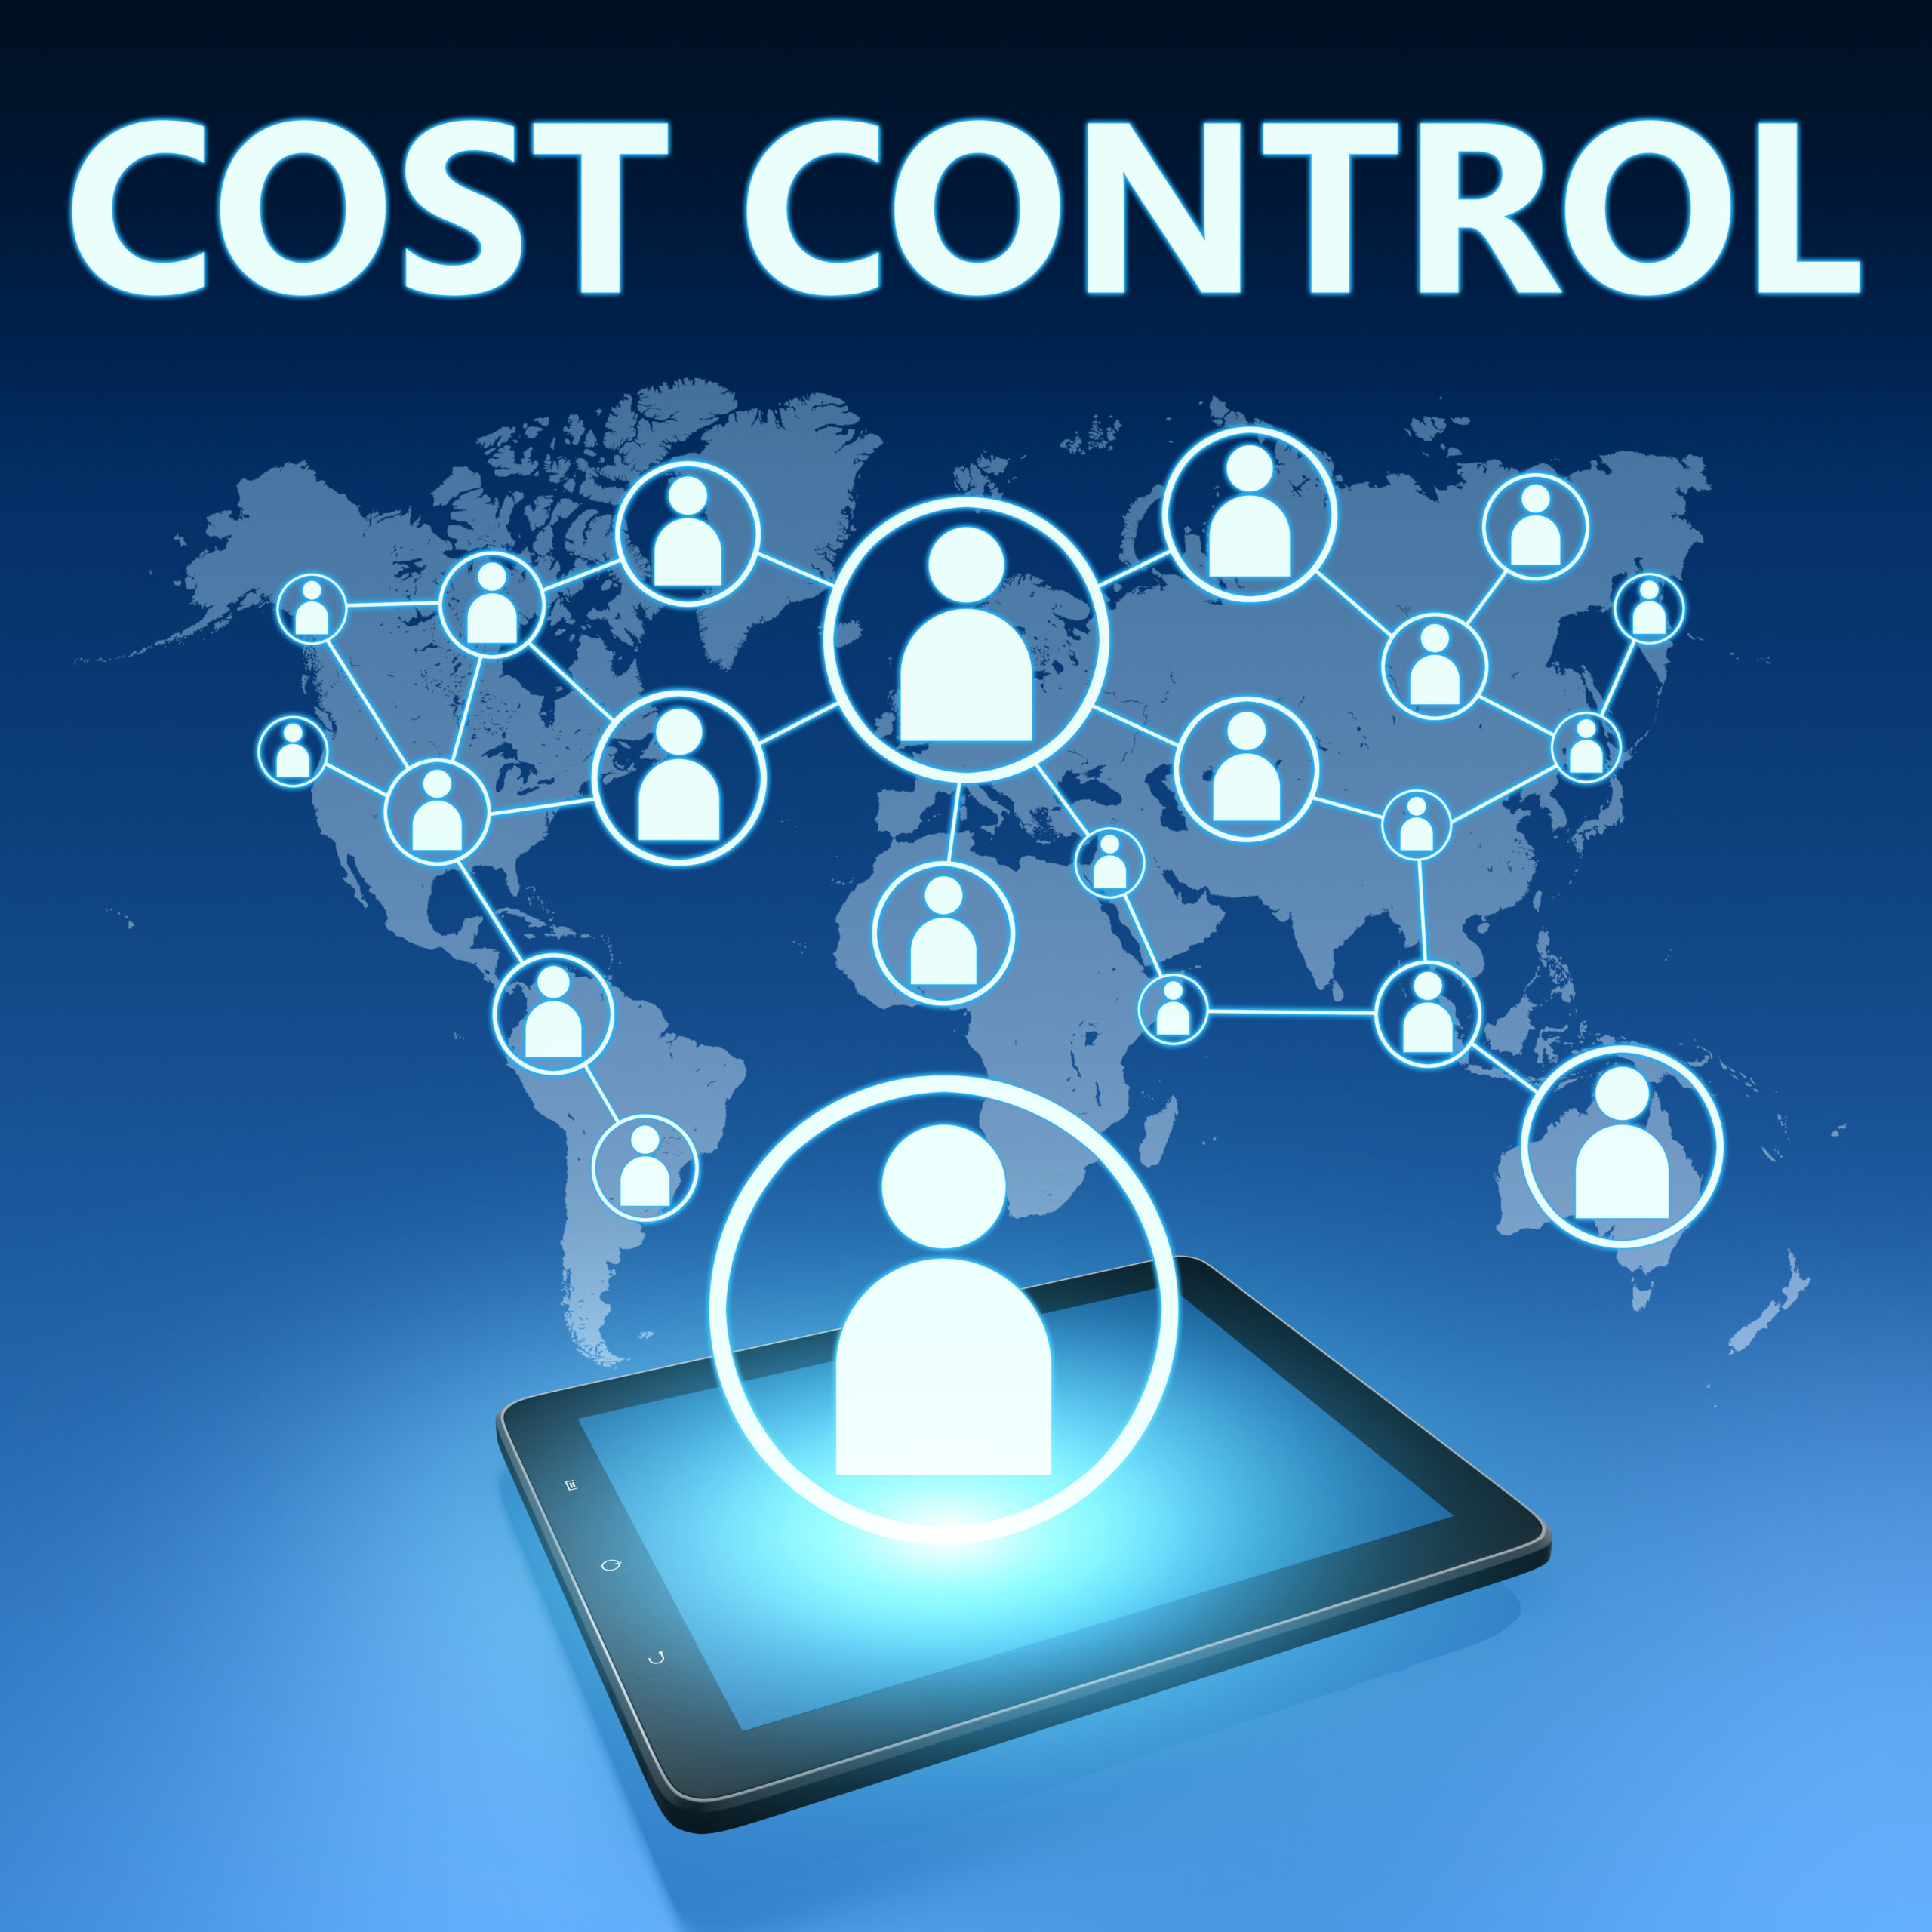 Cost controls and reductions